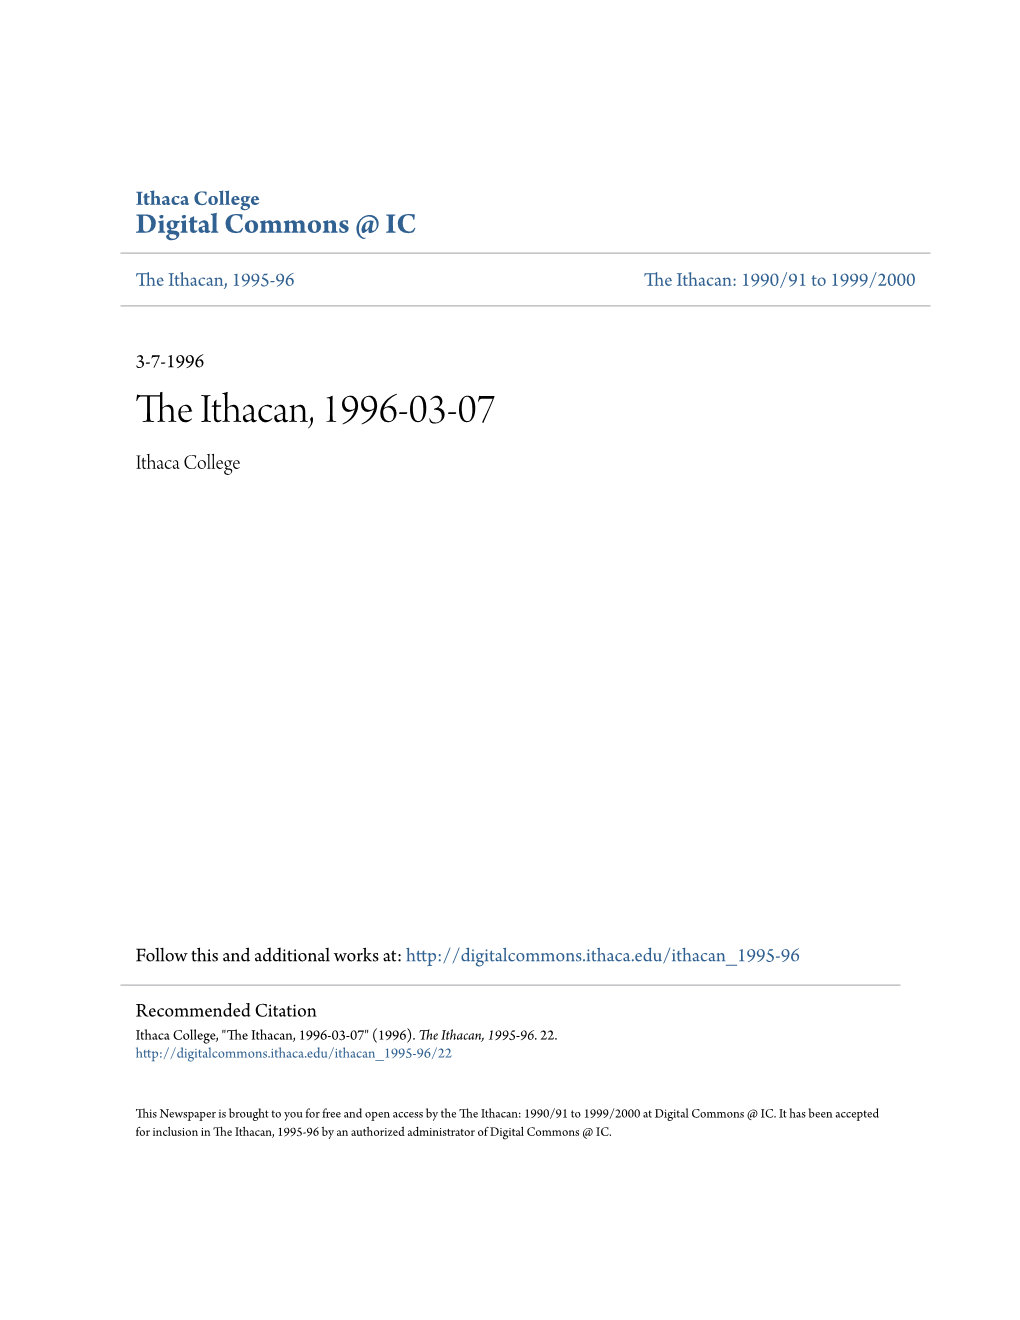 The Ithacan, 1996-03-07